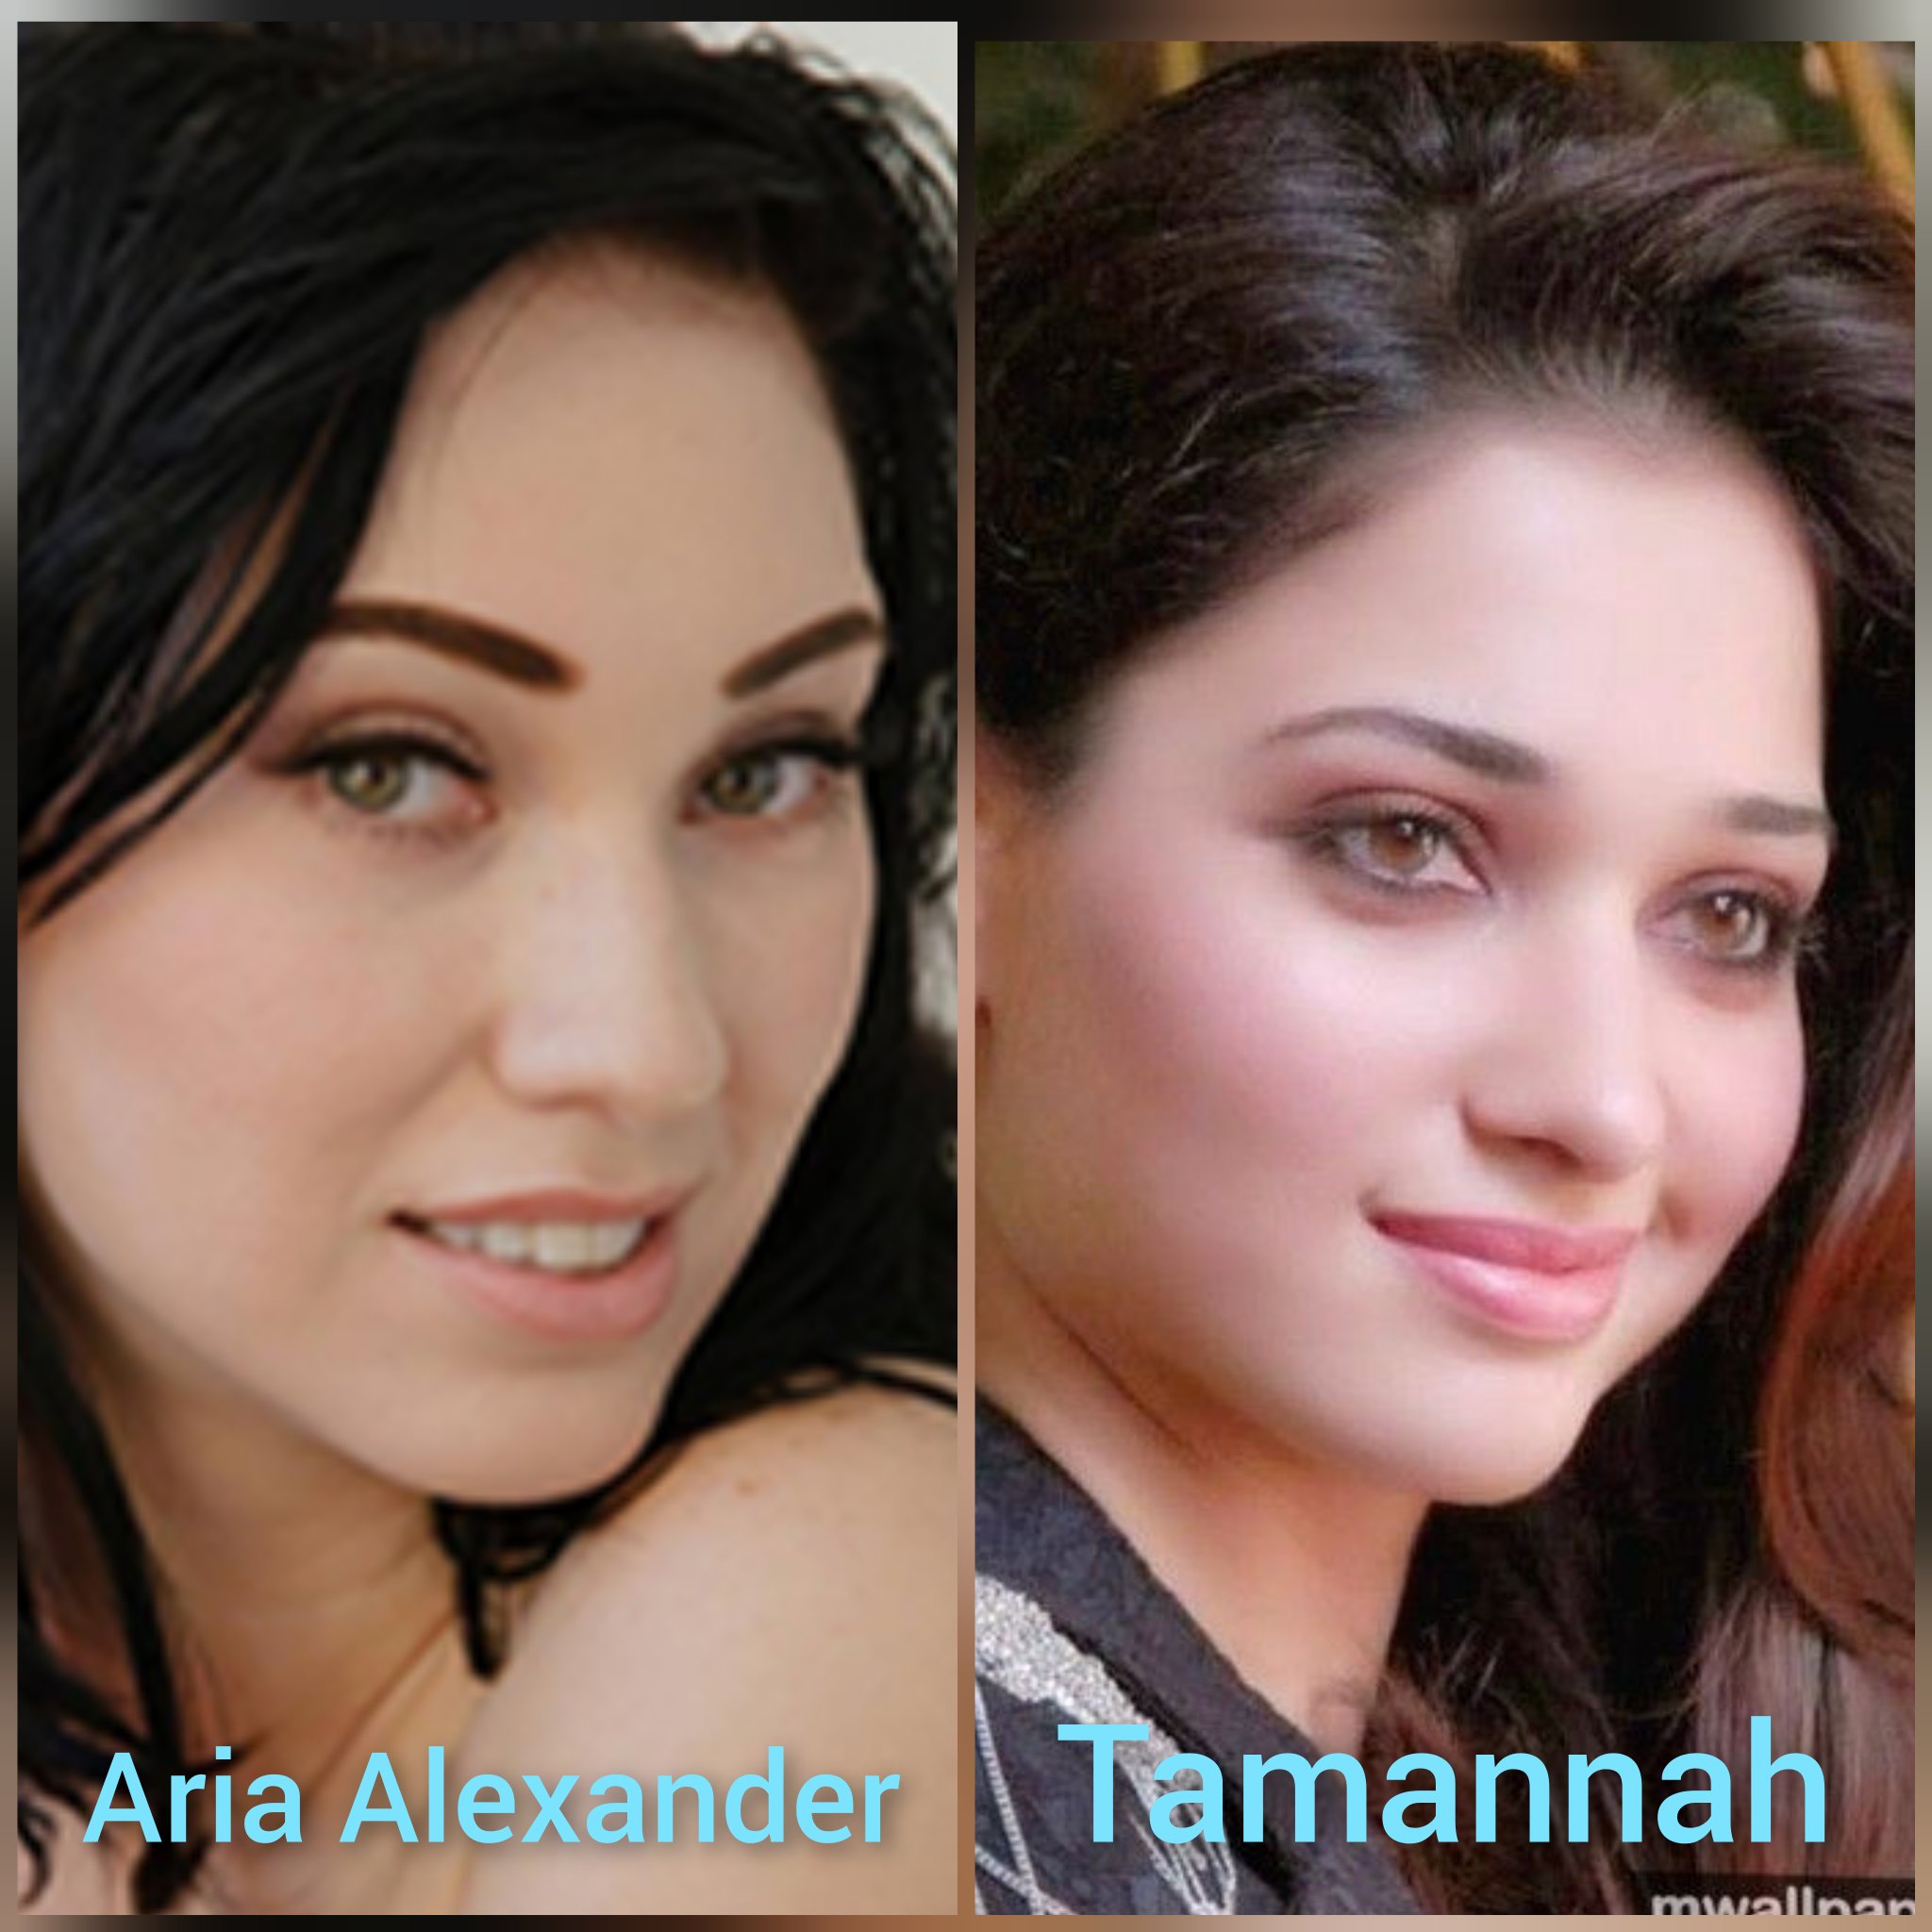 maya on X: Starting new series named look alike here u can see pornstars  who look alike our indian film actresses, so please follow my page for more  interesting look alike pics.